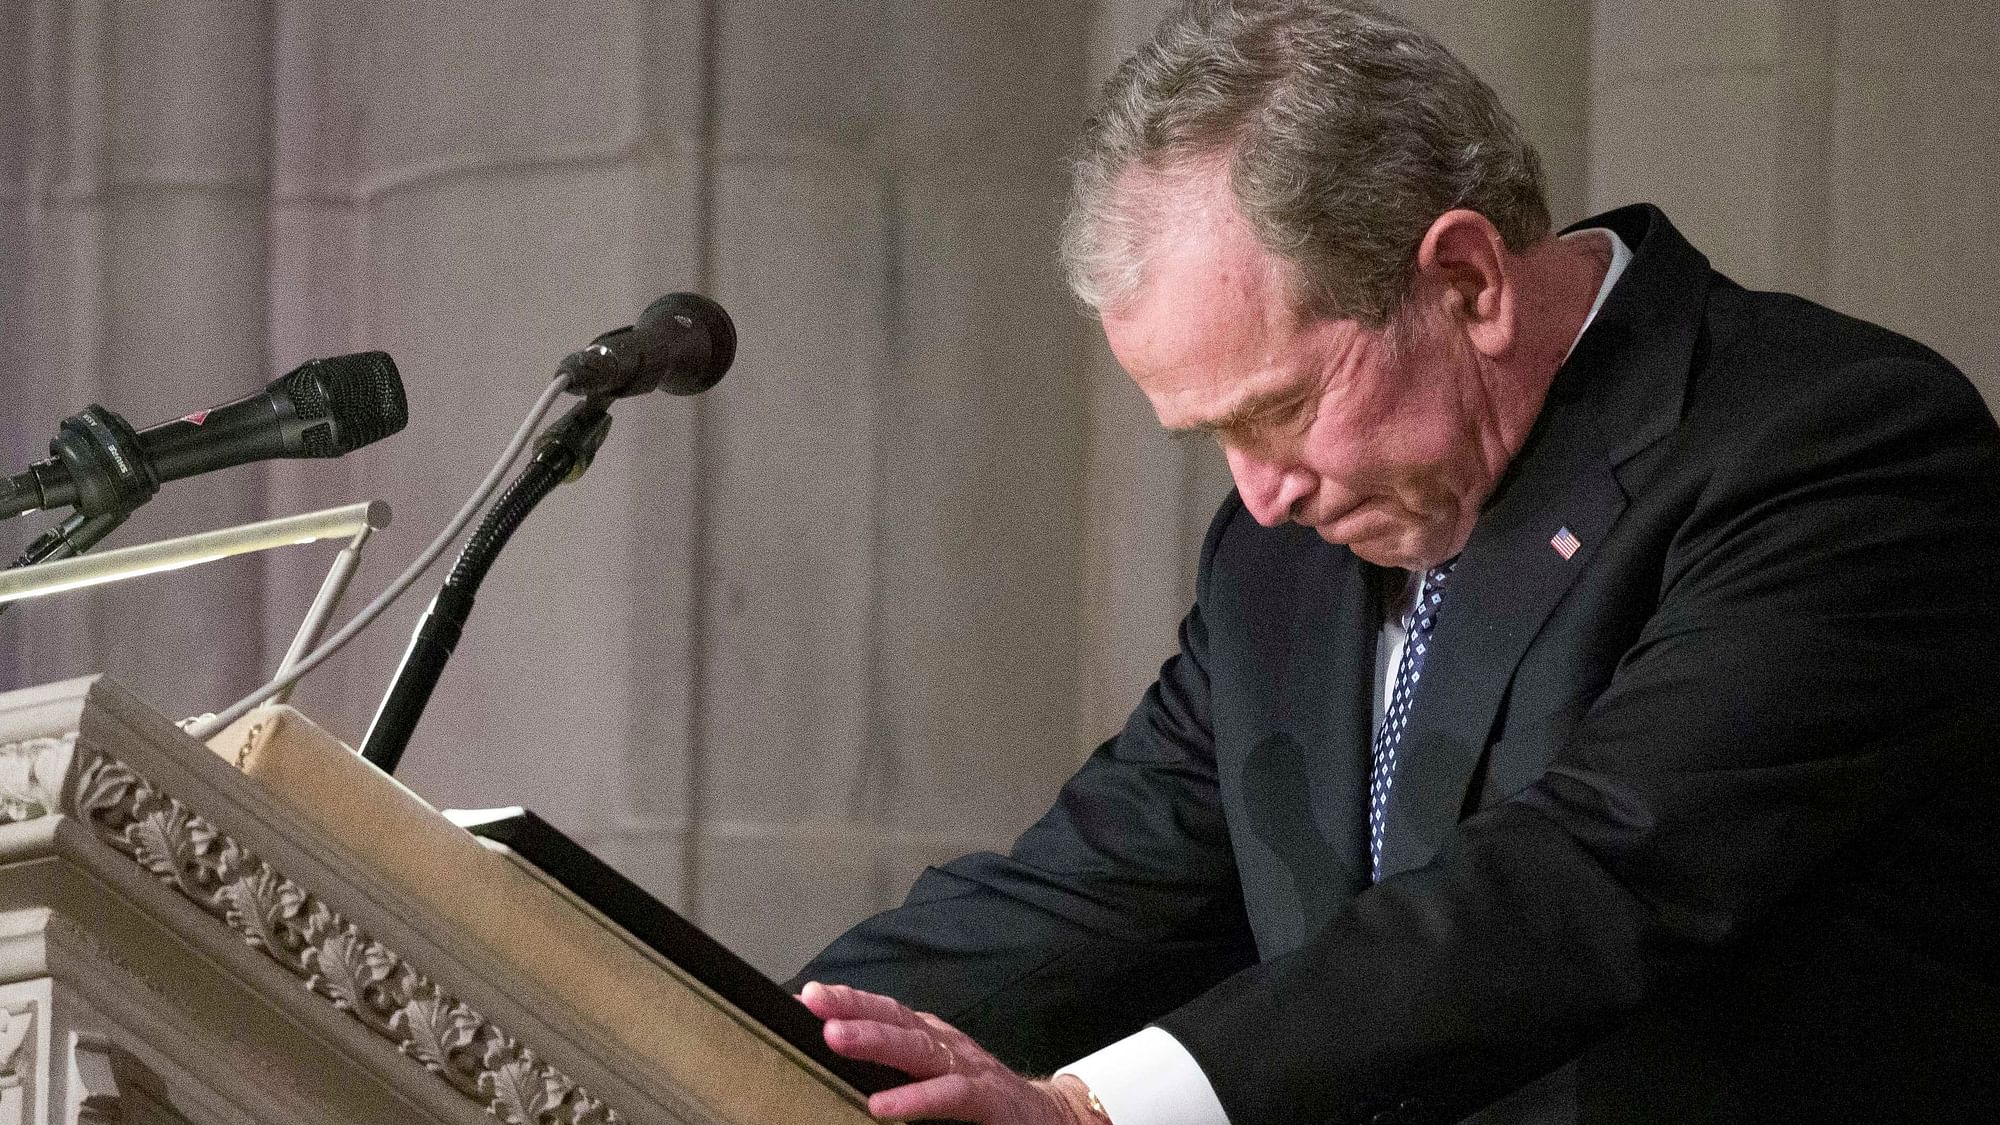 Former President George Bush becomes emotional as he speaks at the State Funeral for his father, former President George H.W. Bush, at the National Cathedral.